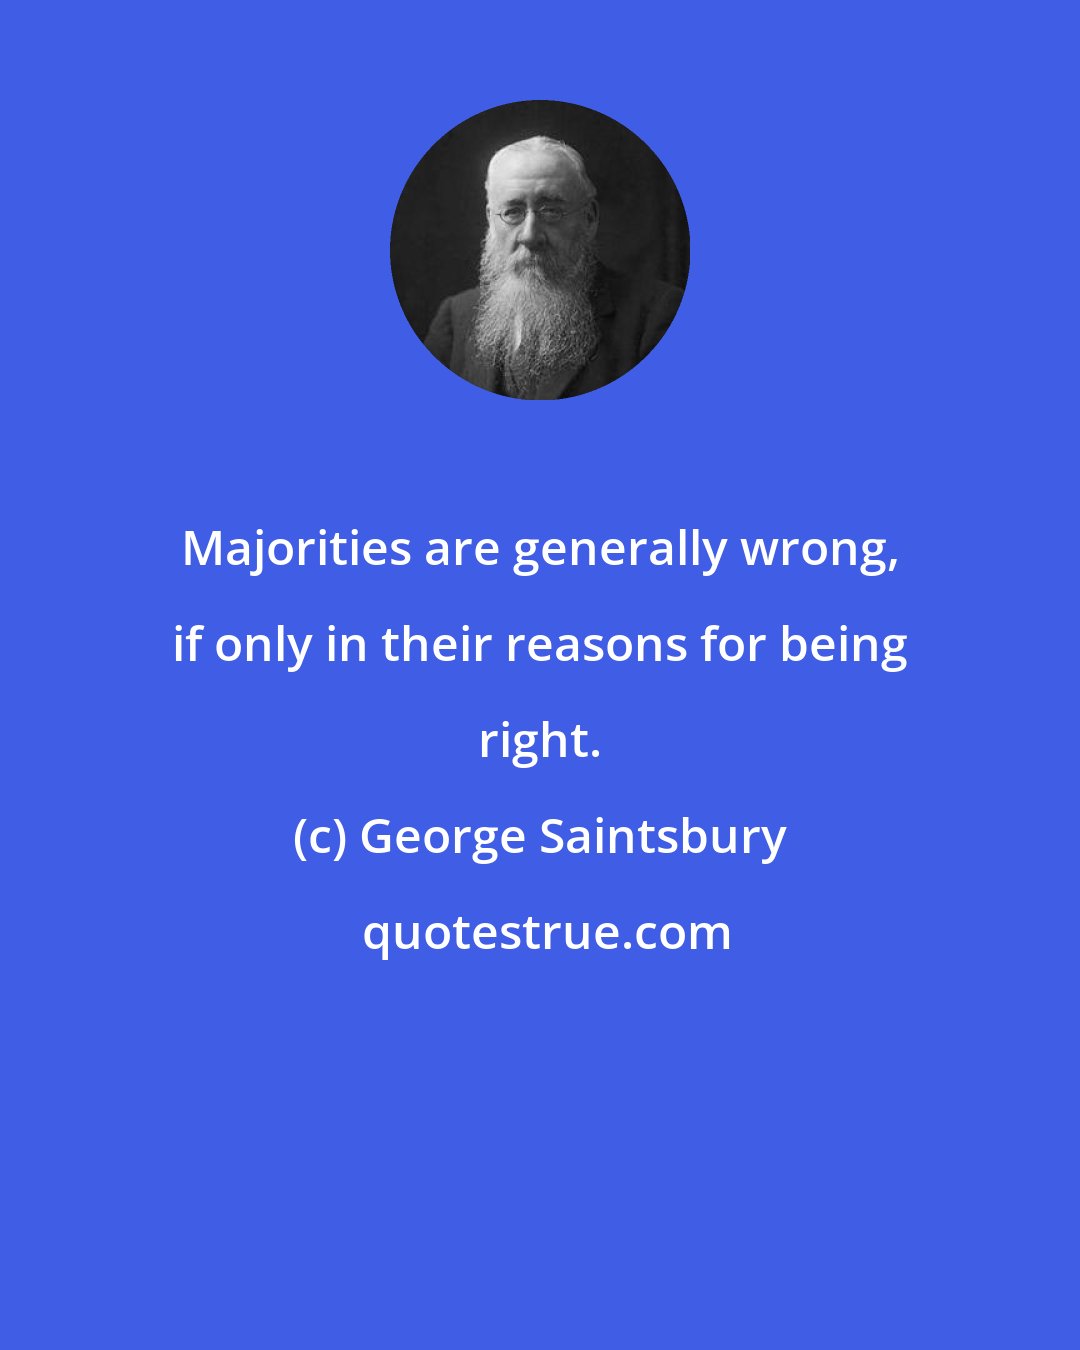 George Saintsbury: Majorities are generally wrong, if only in their reasons for being right.